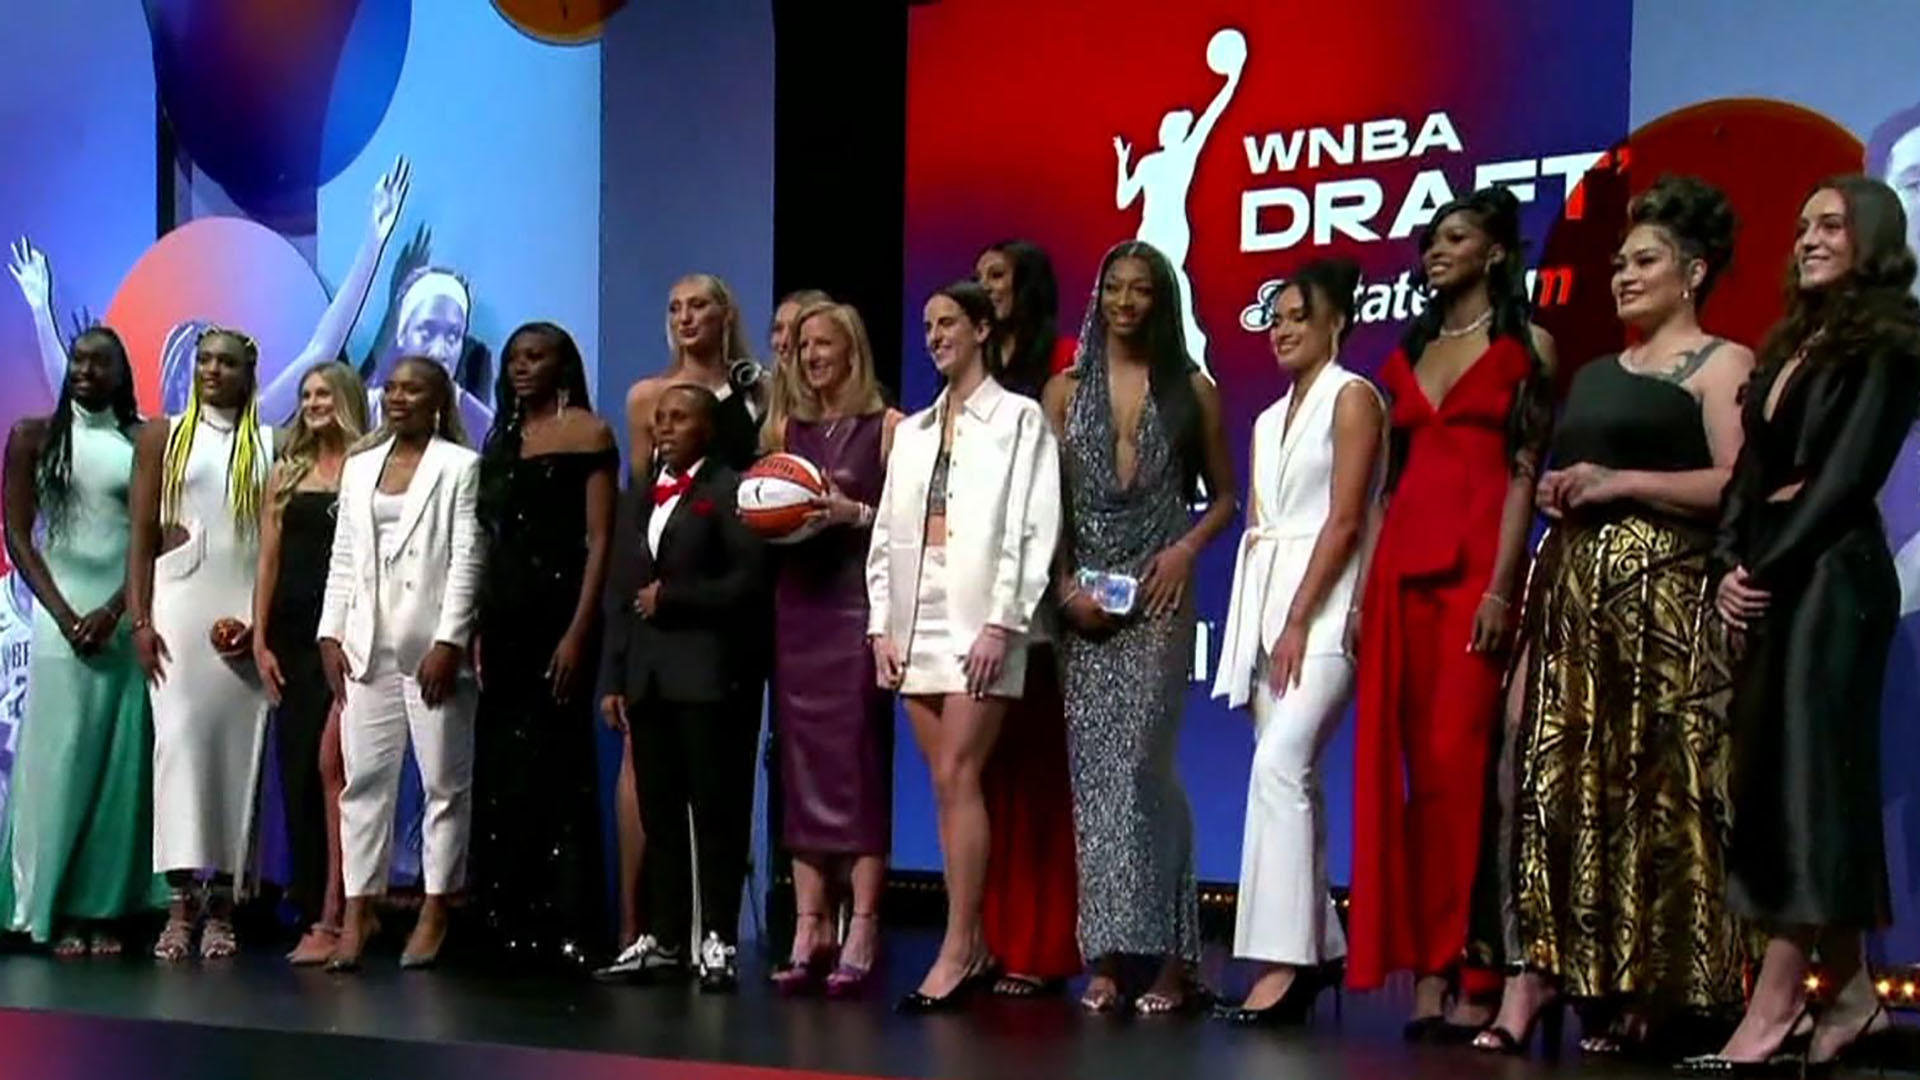 WNBA season gets underway featuring Caitlin Clark's debut and more